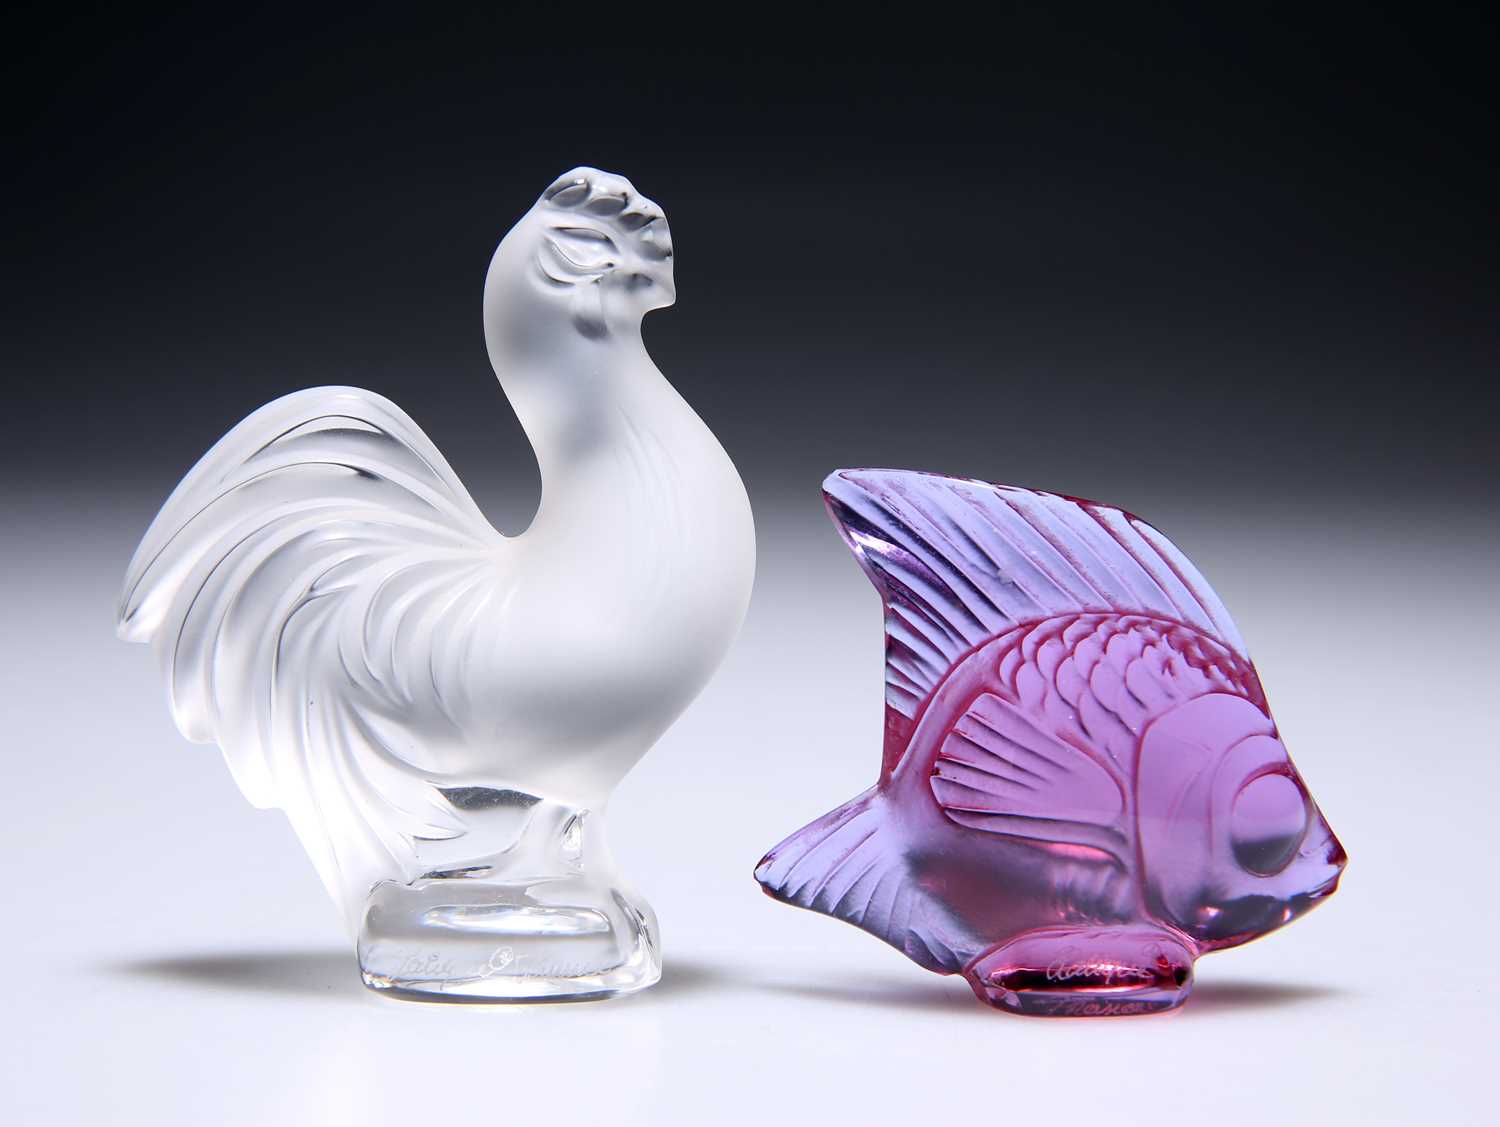 TWO SMALL LALIQUE ANIMAL MODELS - Image 2 of 2